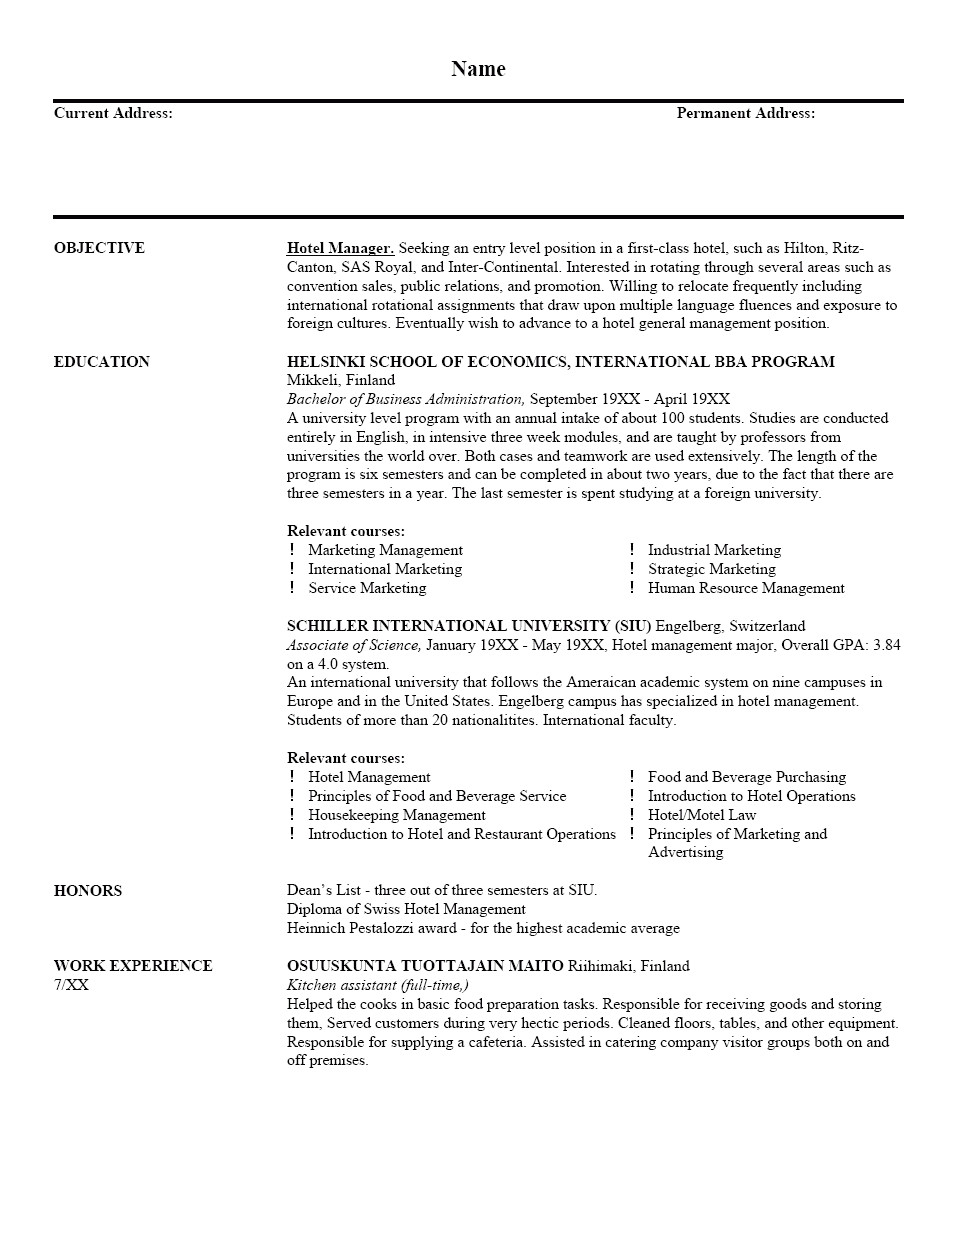 Free Resume Template or Tips Free Sample Resume Health Symptoms and Cure Com